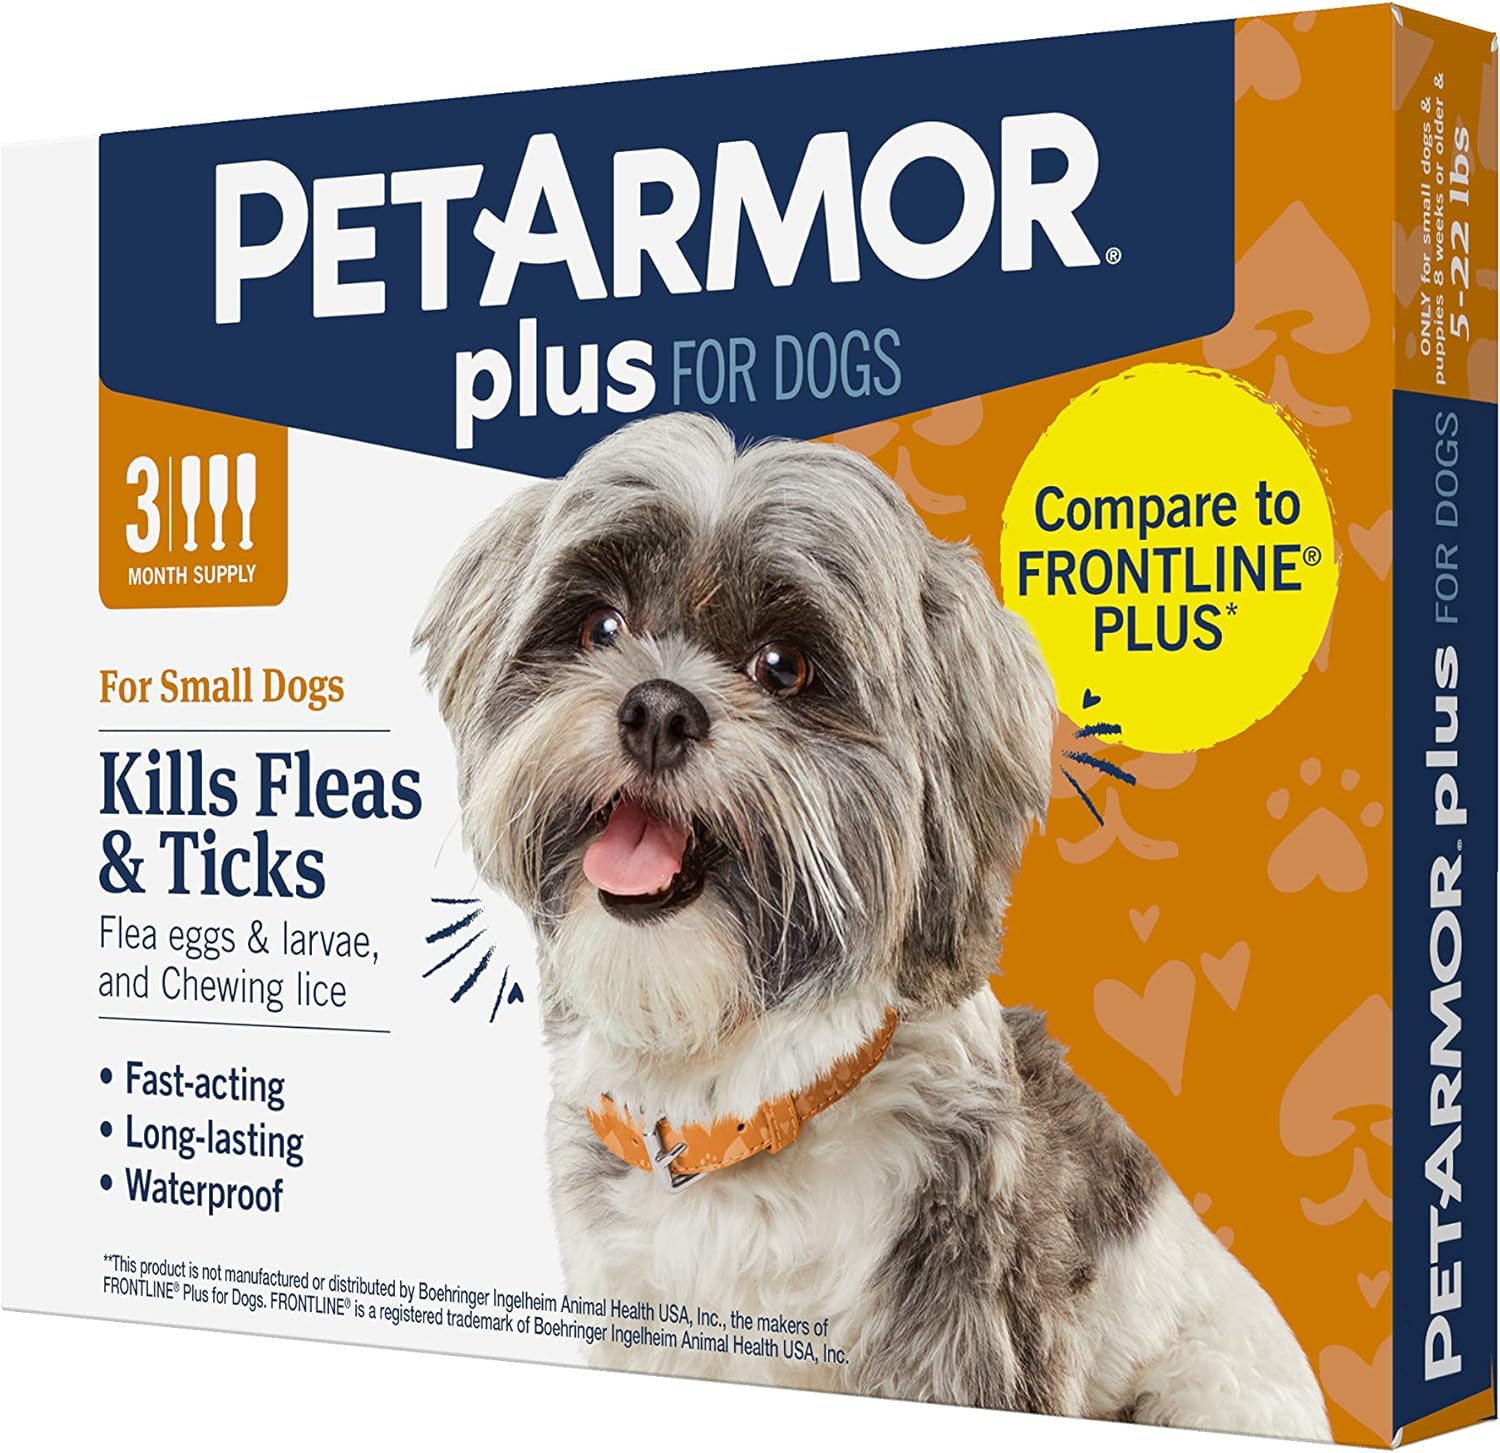 PetArmor Plus Flea and Tick Prevention for Dogs, Dog Flea and Tick Treatment, Waterproof Topical, Fast Acting, Small Dogs (5-22 lbs), 3 Doses (Pack of 1)